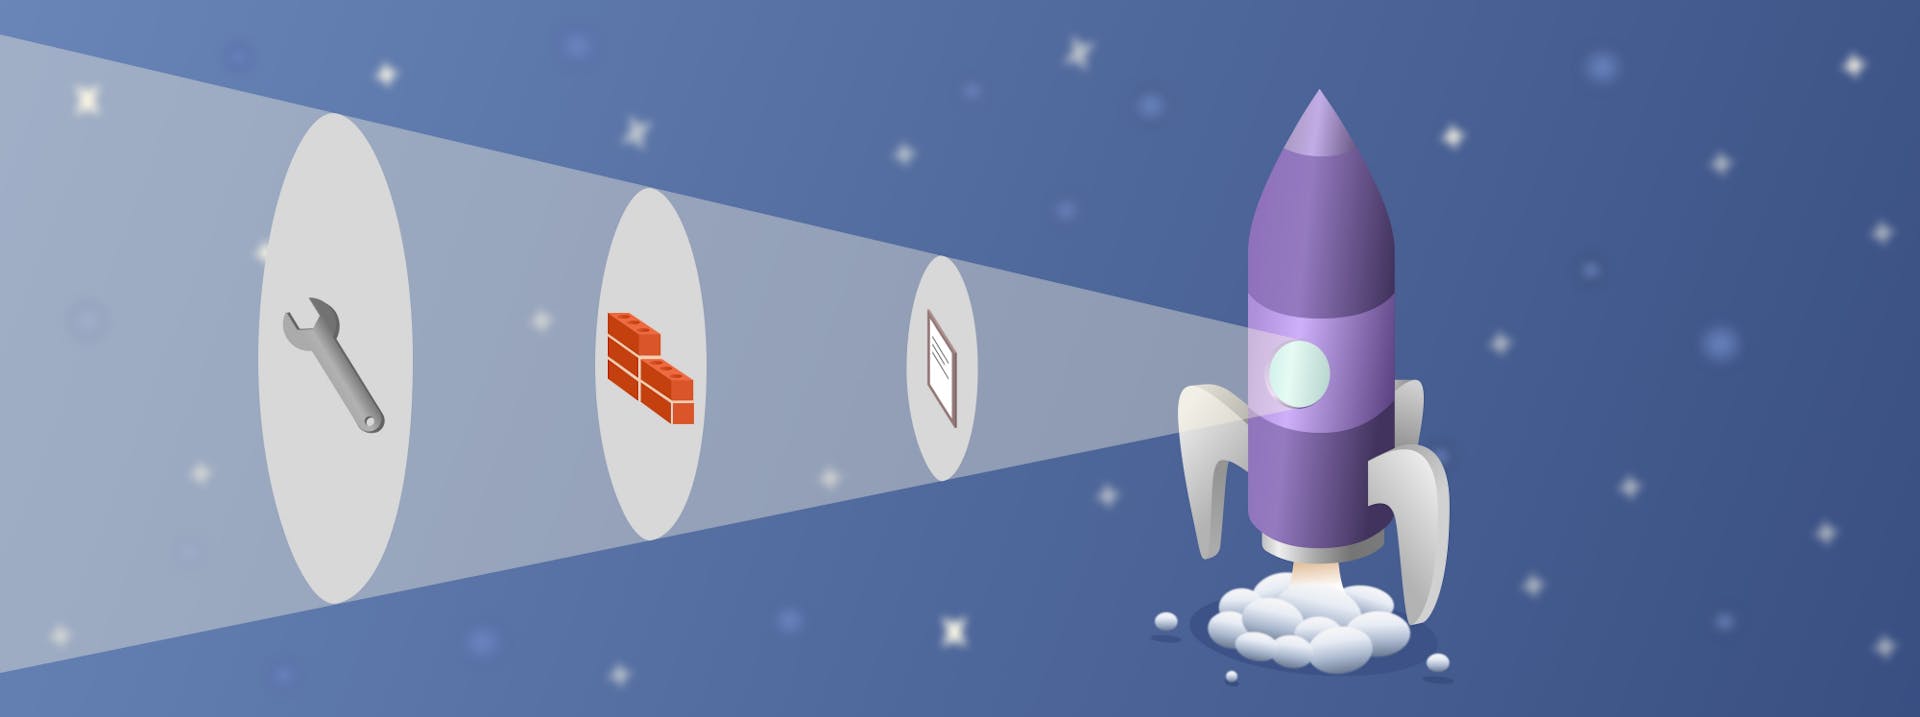 Illustration of a purple rocket taking off with a beam of light shining out of the window and illuminating items including a spanner and a pile of bricks